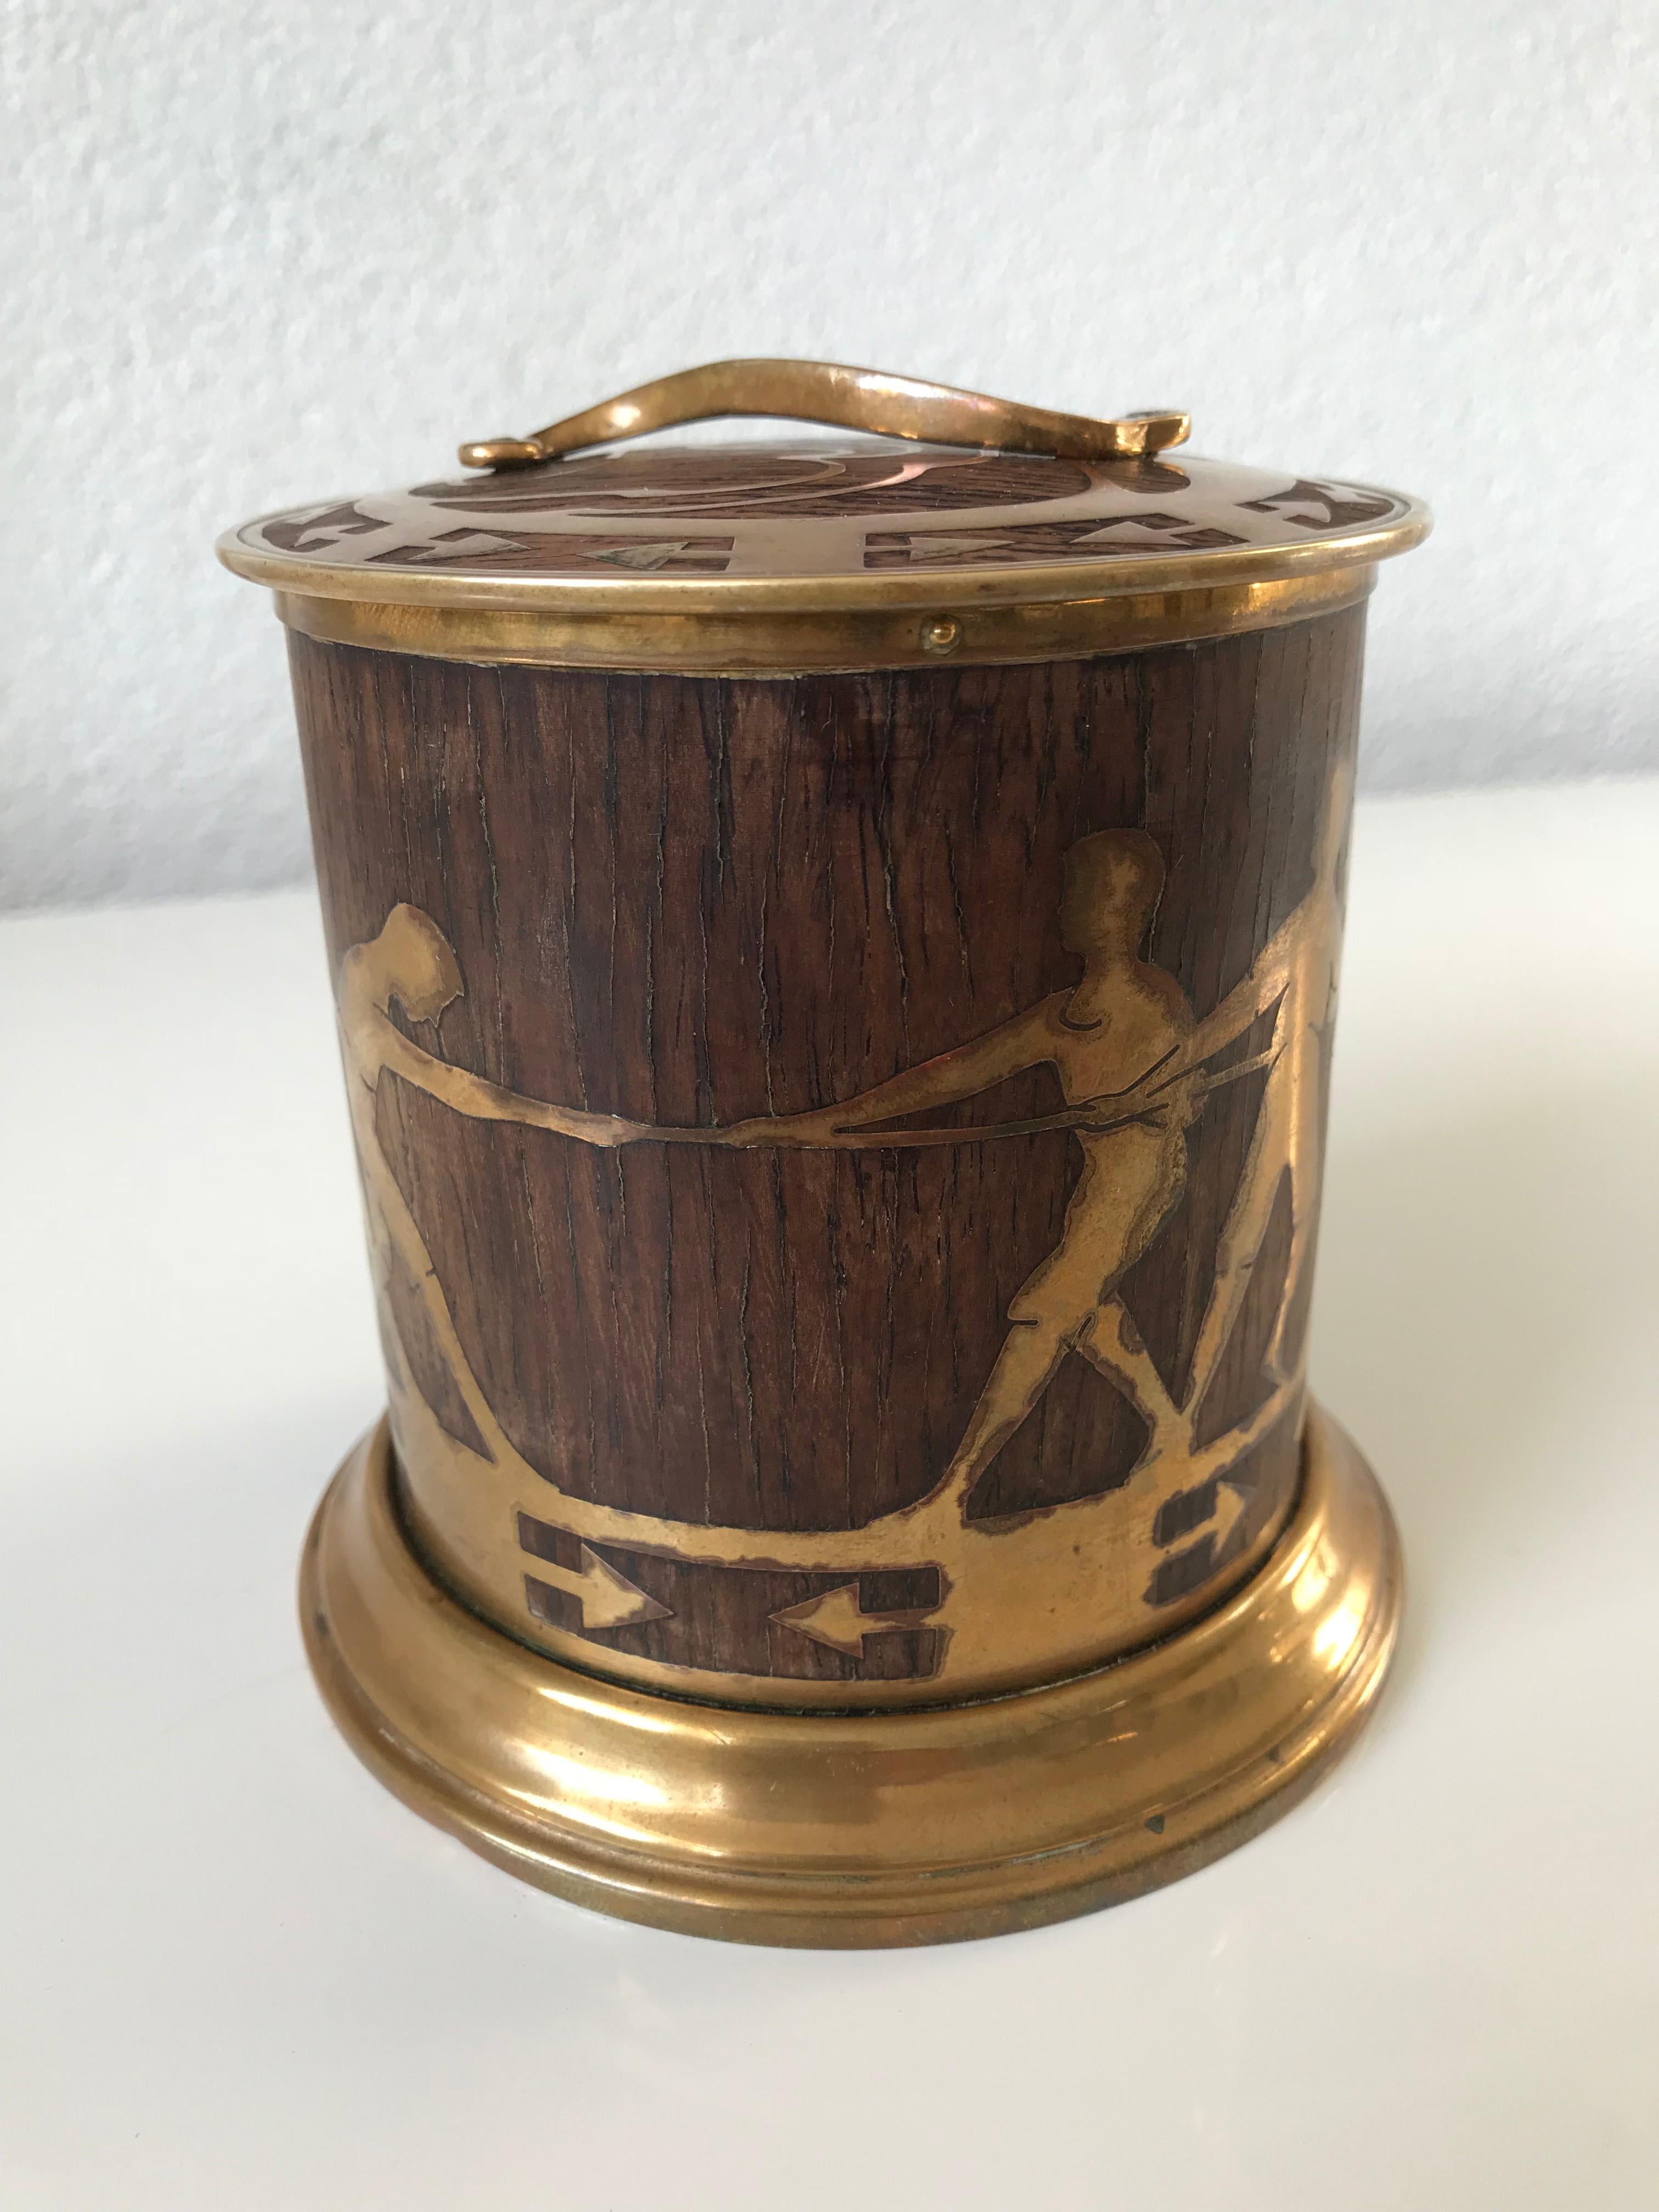 Hand-Crafted Arts & Crafts Brass and Wood Round Box by Erhard & Sohne, Vienna Secessionist